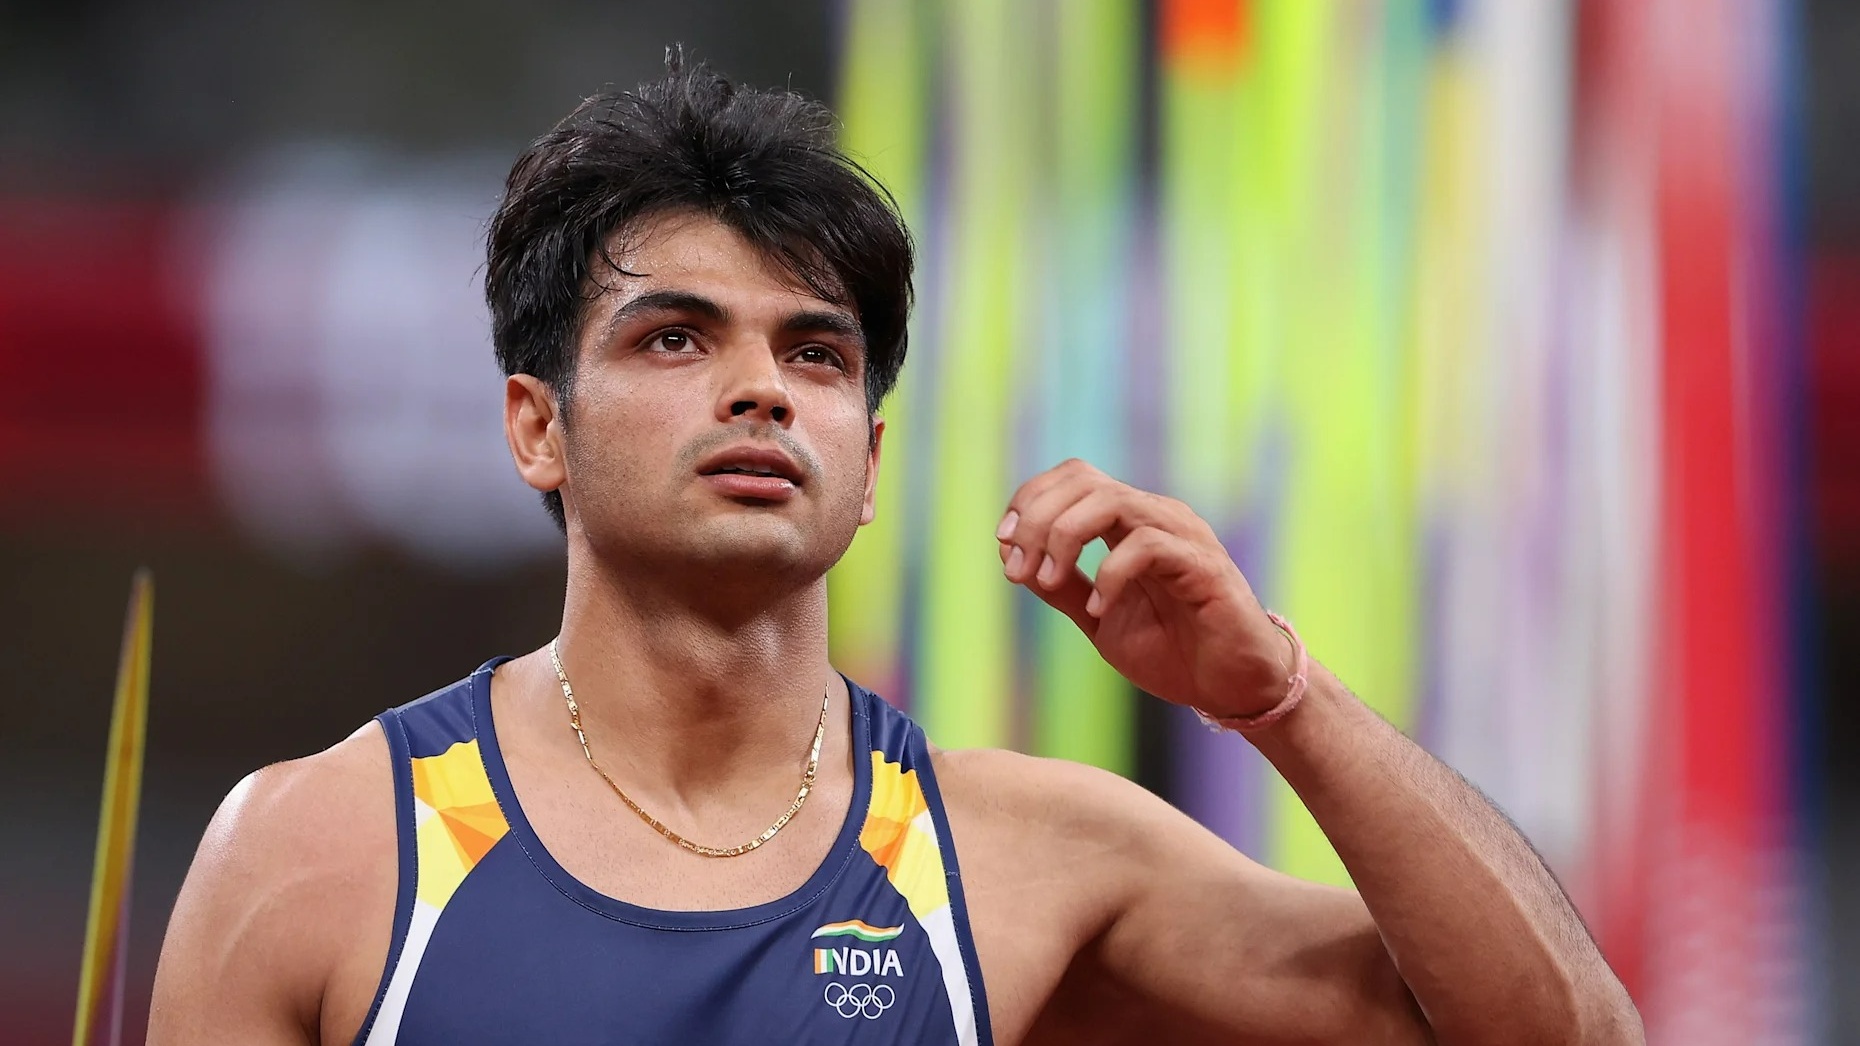 Neeraj Chopra at World Athletics Championships 2022 How to watch live the javelin event in India TechRadar